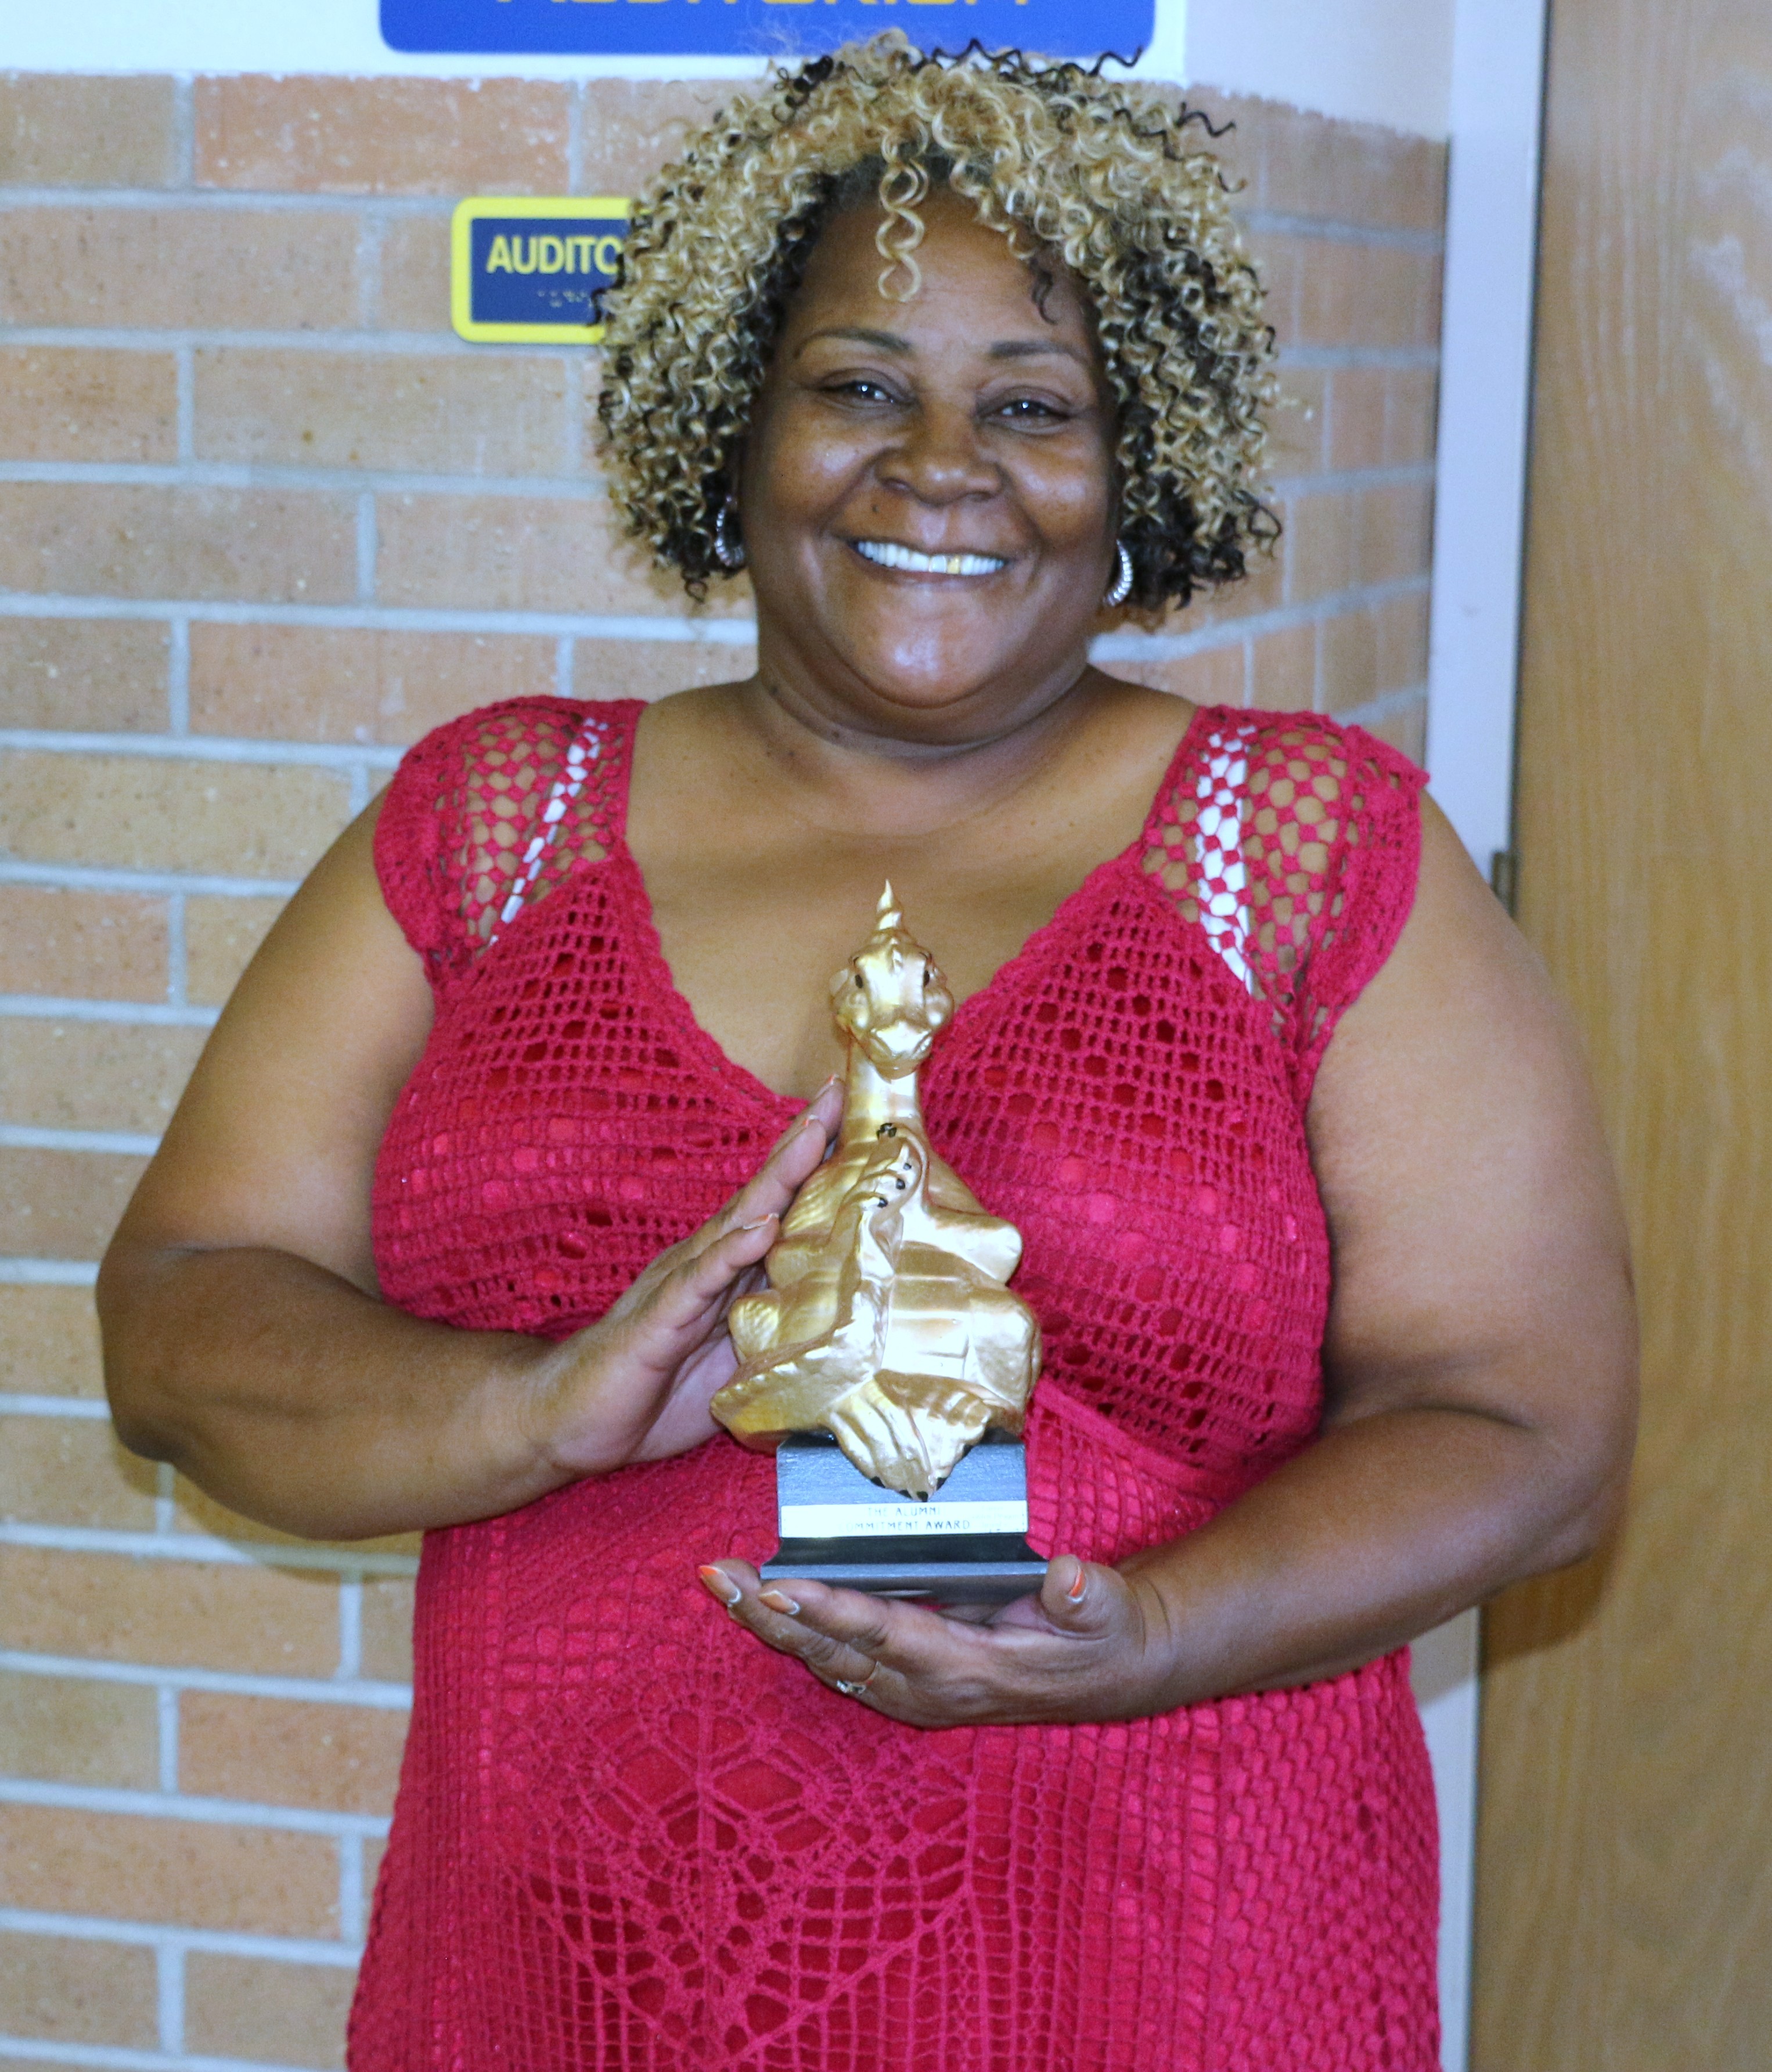 Mrs. Lila Ford Mitchell accepted the award for Mr. Thurman Jefferson